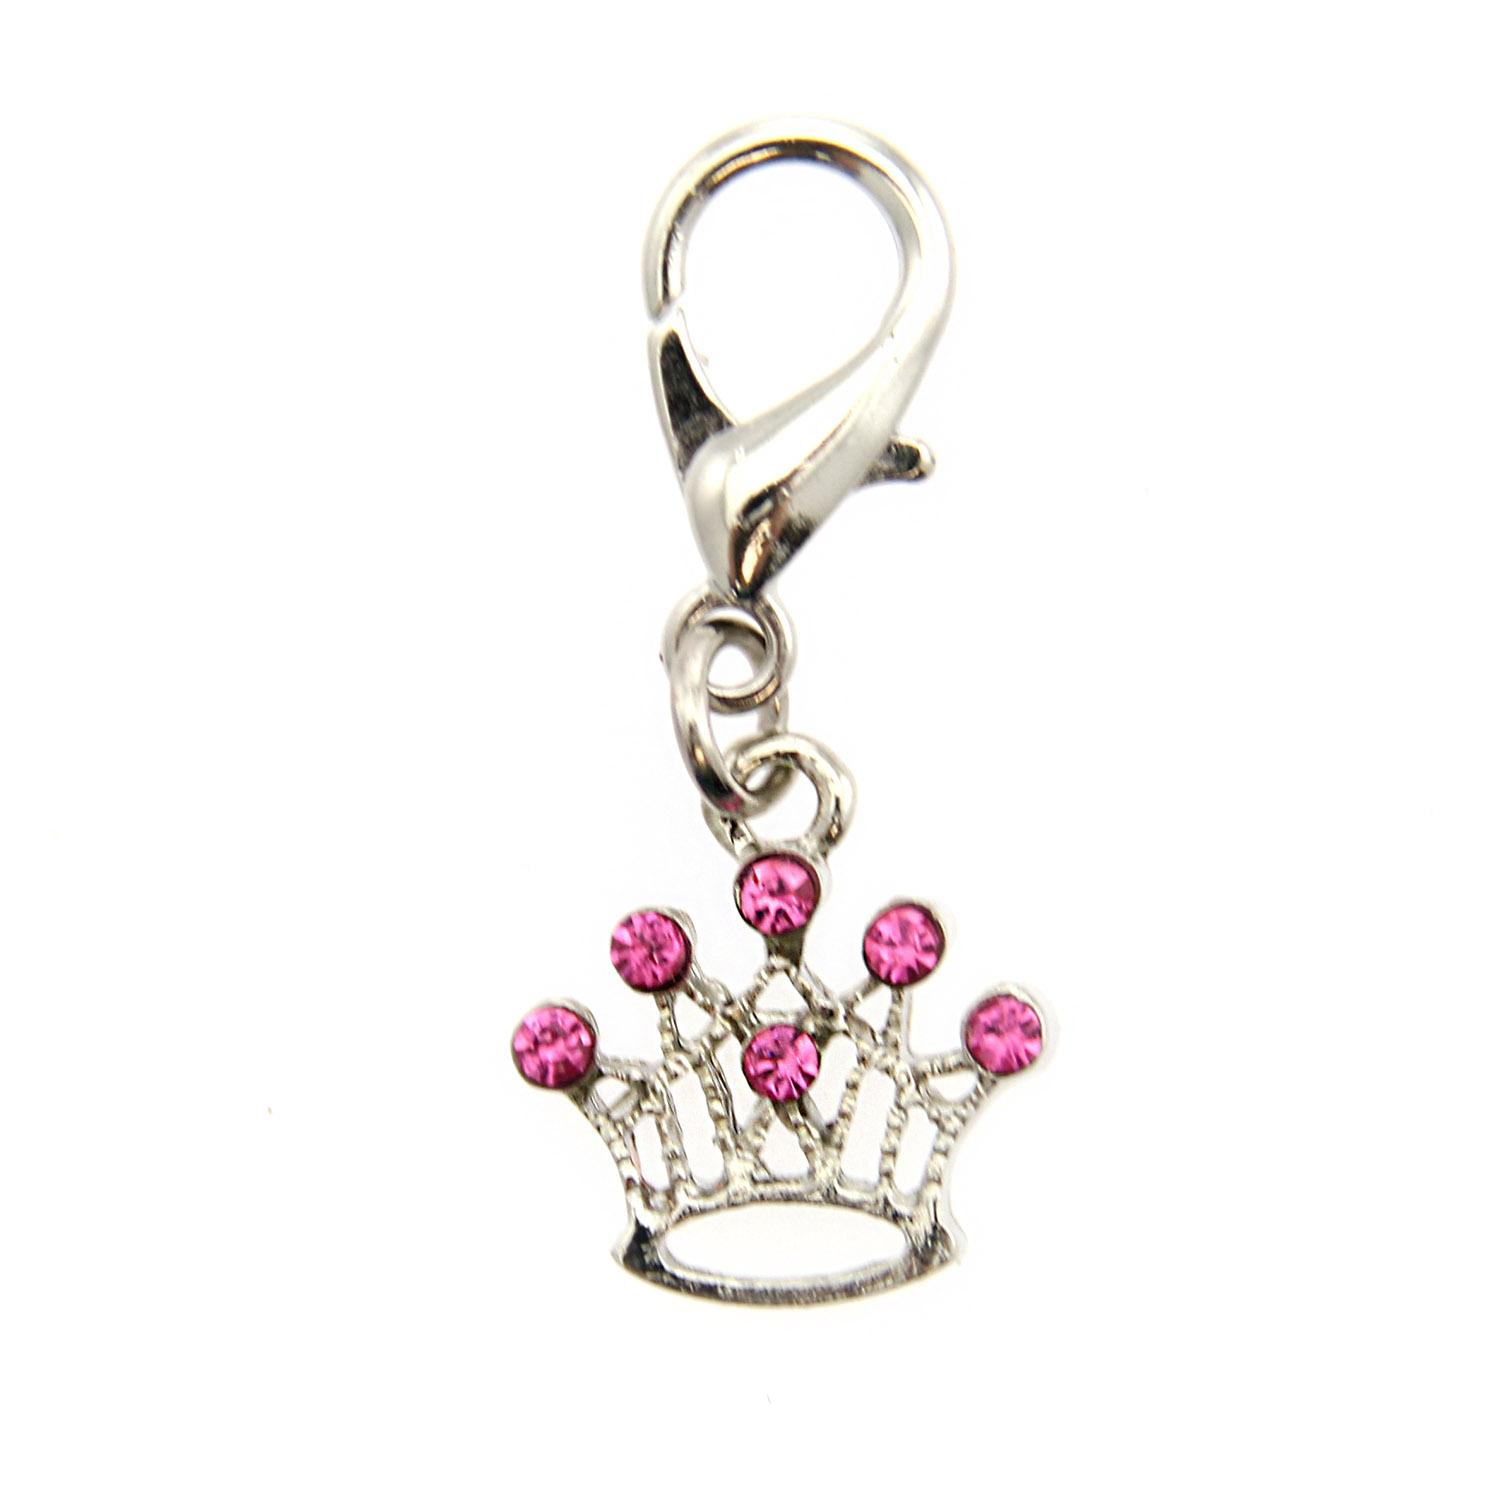 Crown D-Ring Pet Collar Charm by FouFou Dog - Pink